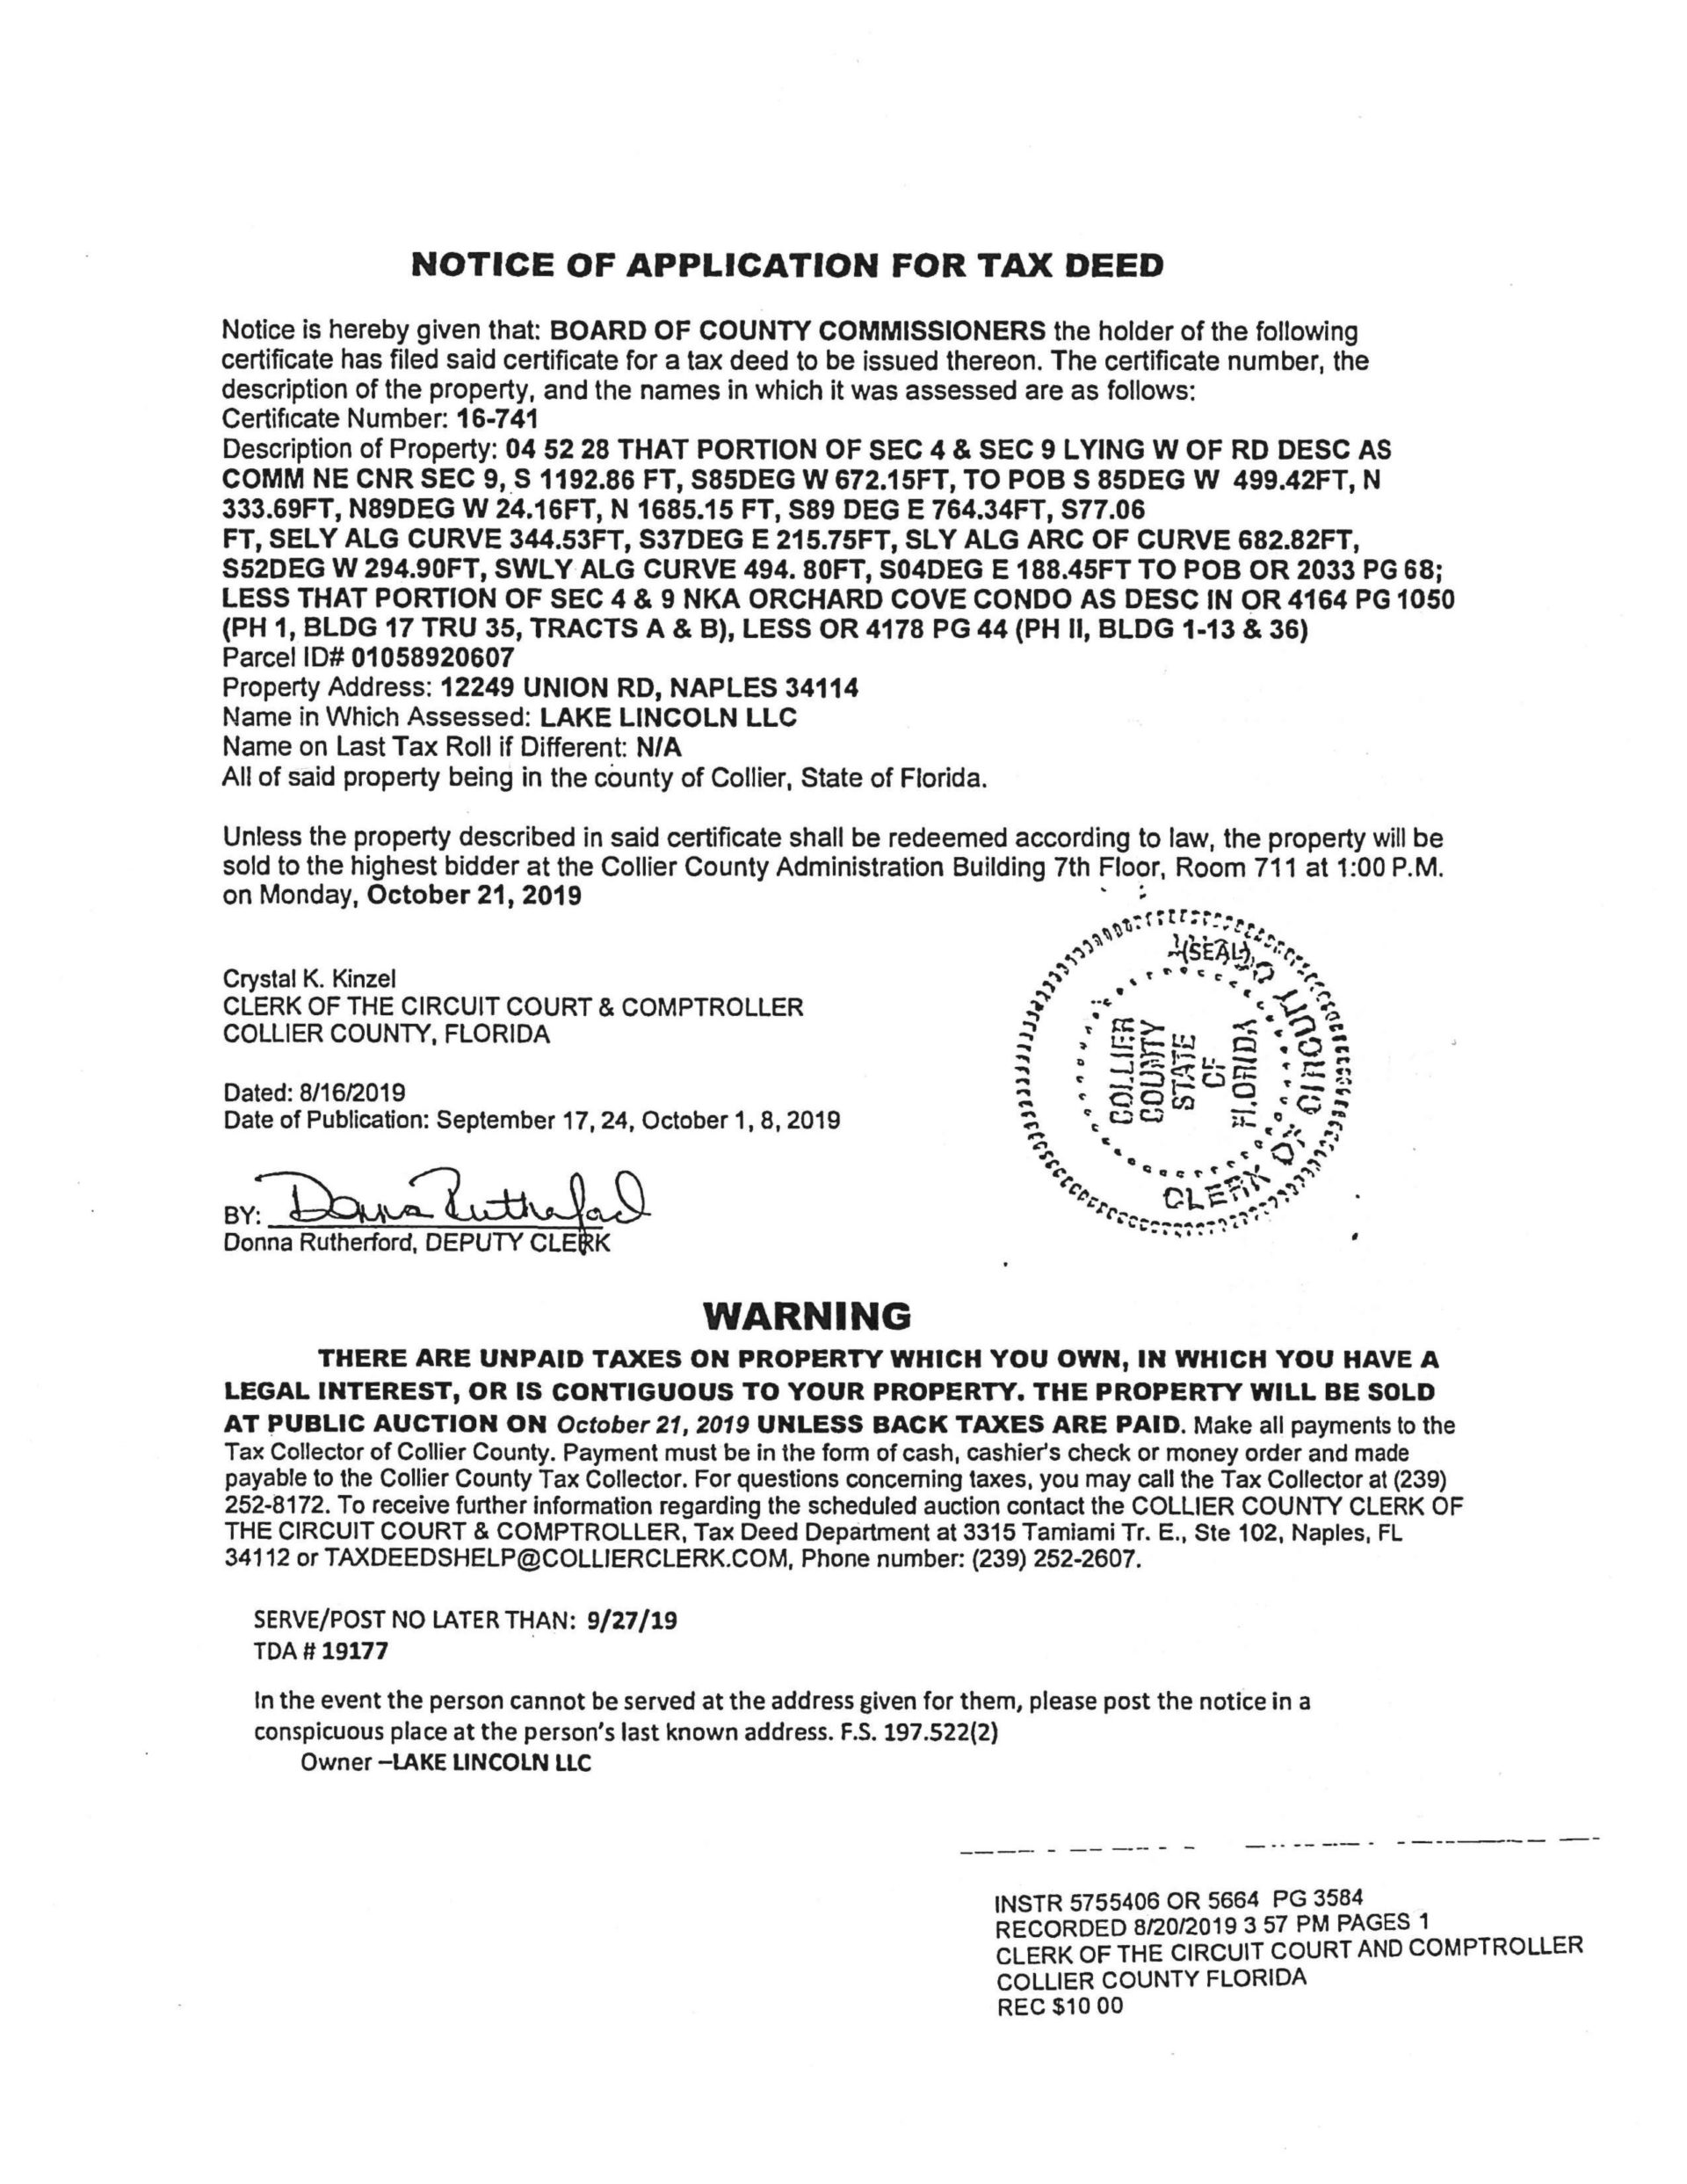 12249 Union Road Tax Deed Application page 1